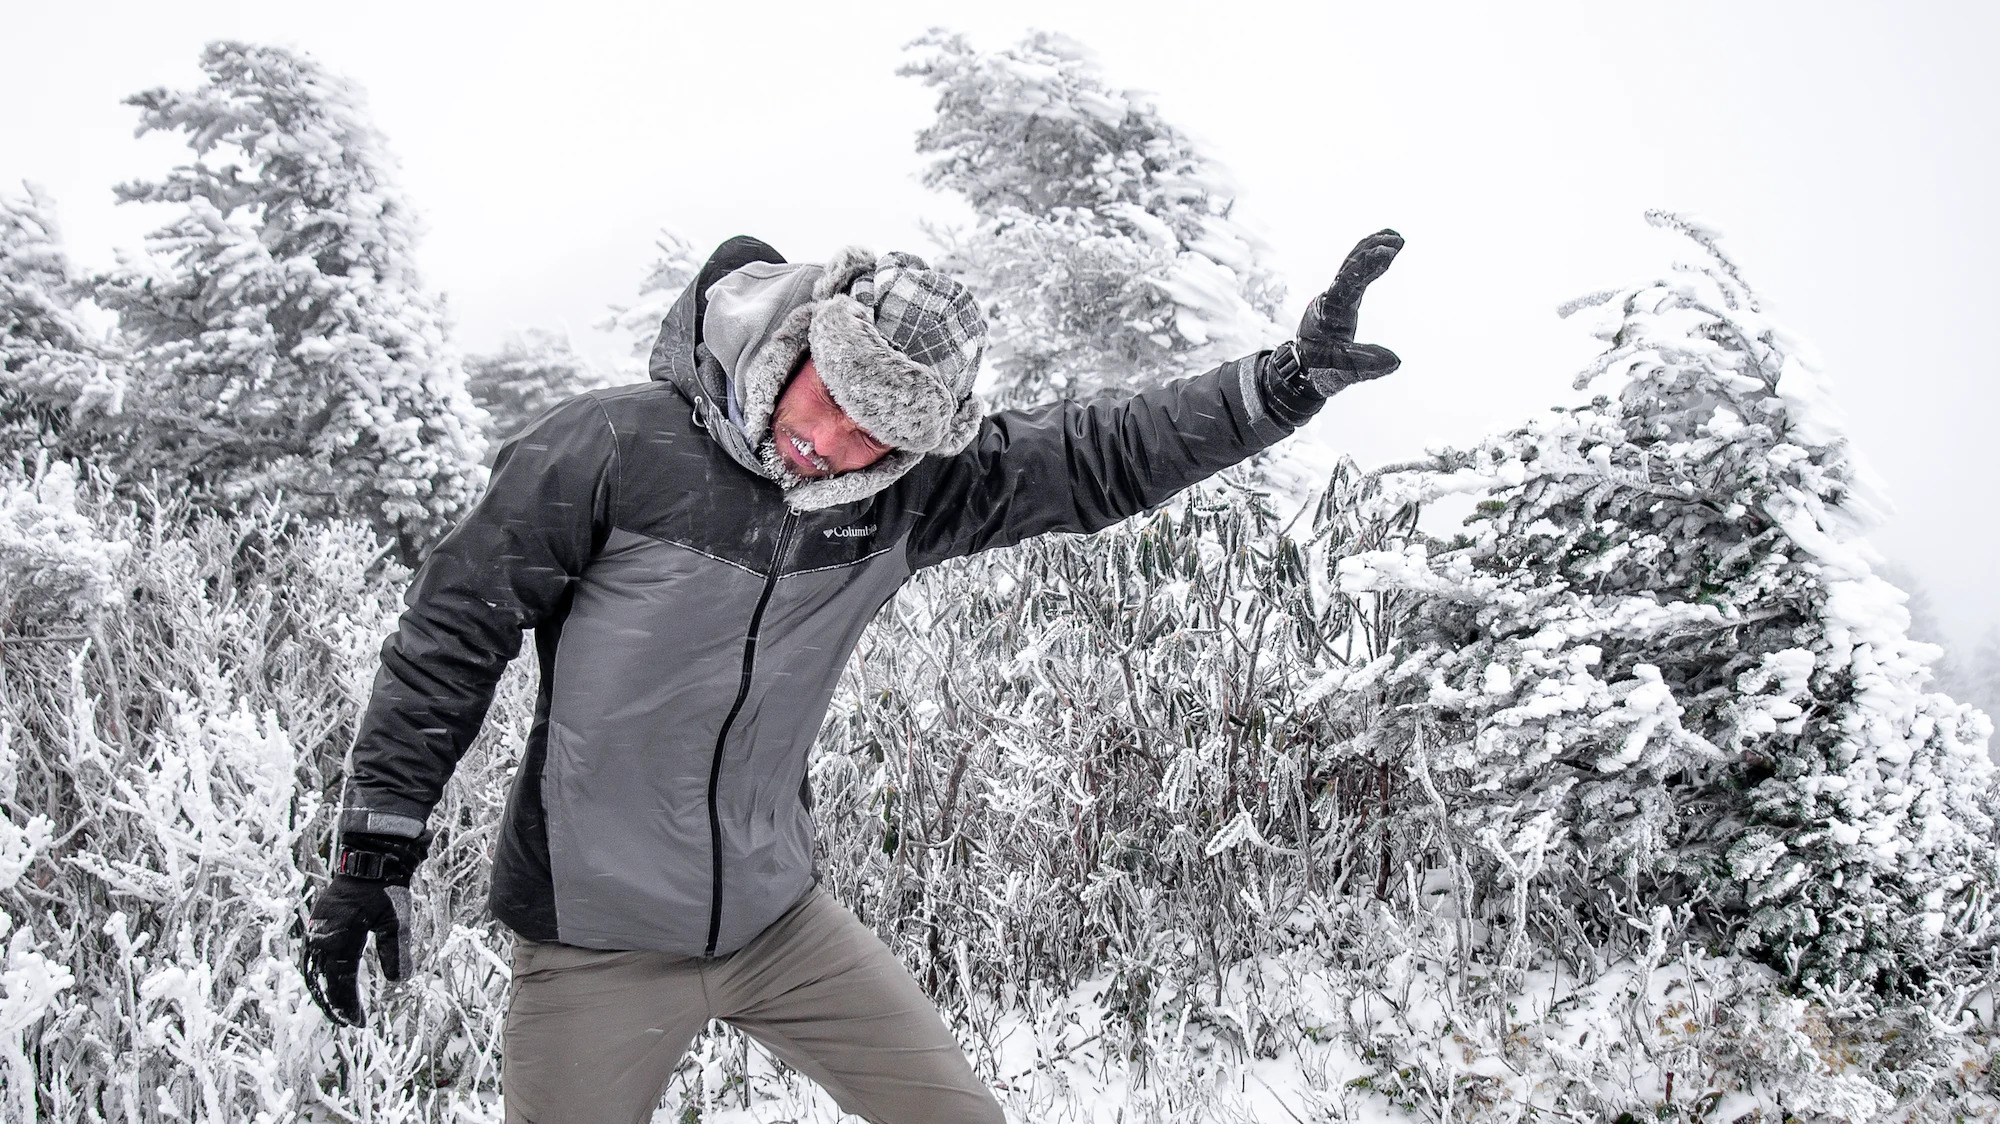 Evan Fisher chasing extreme weather conditions on Grandfather Mountain.